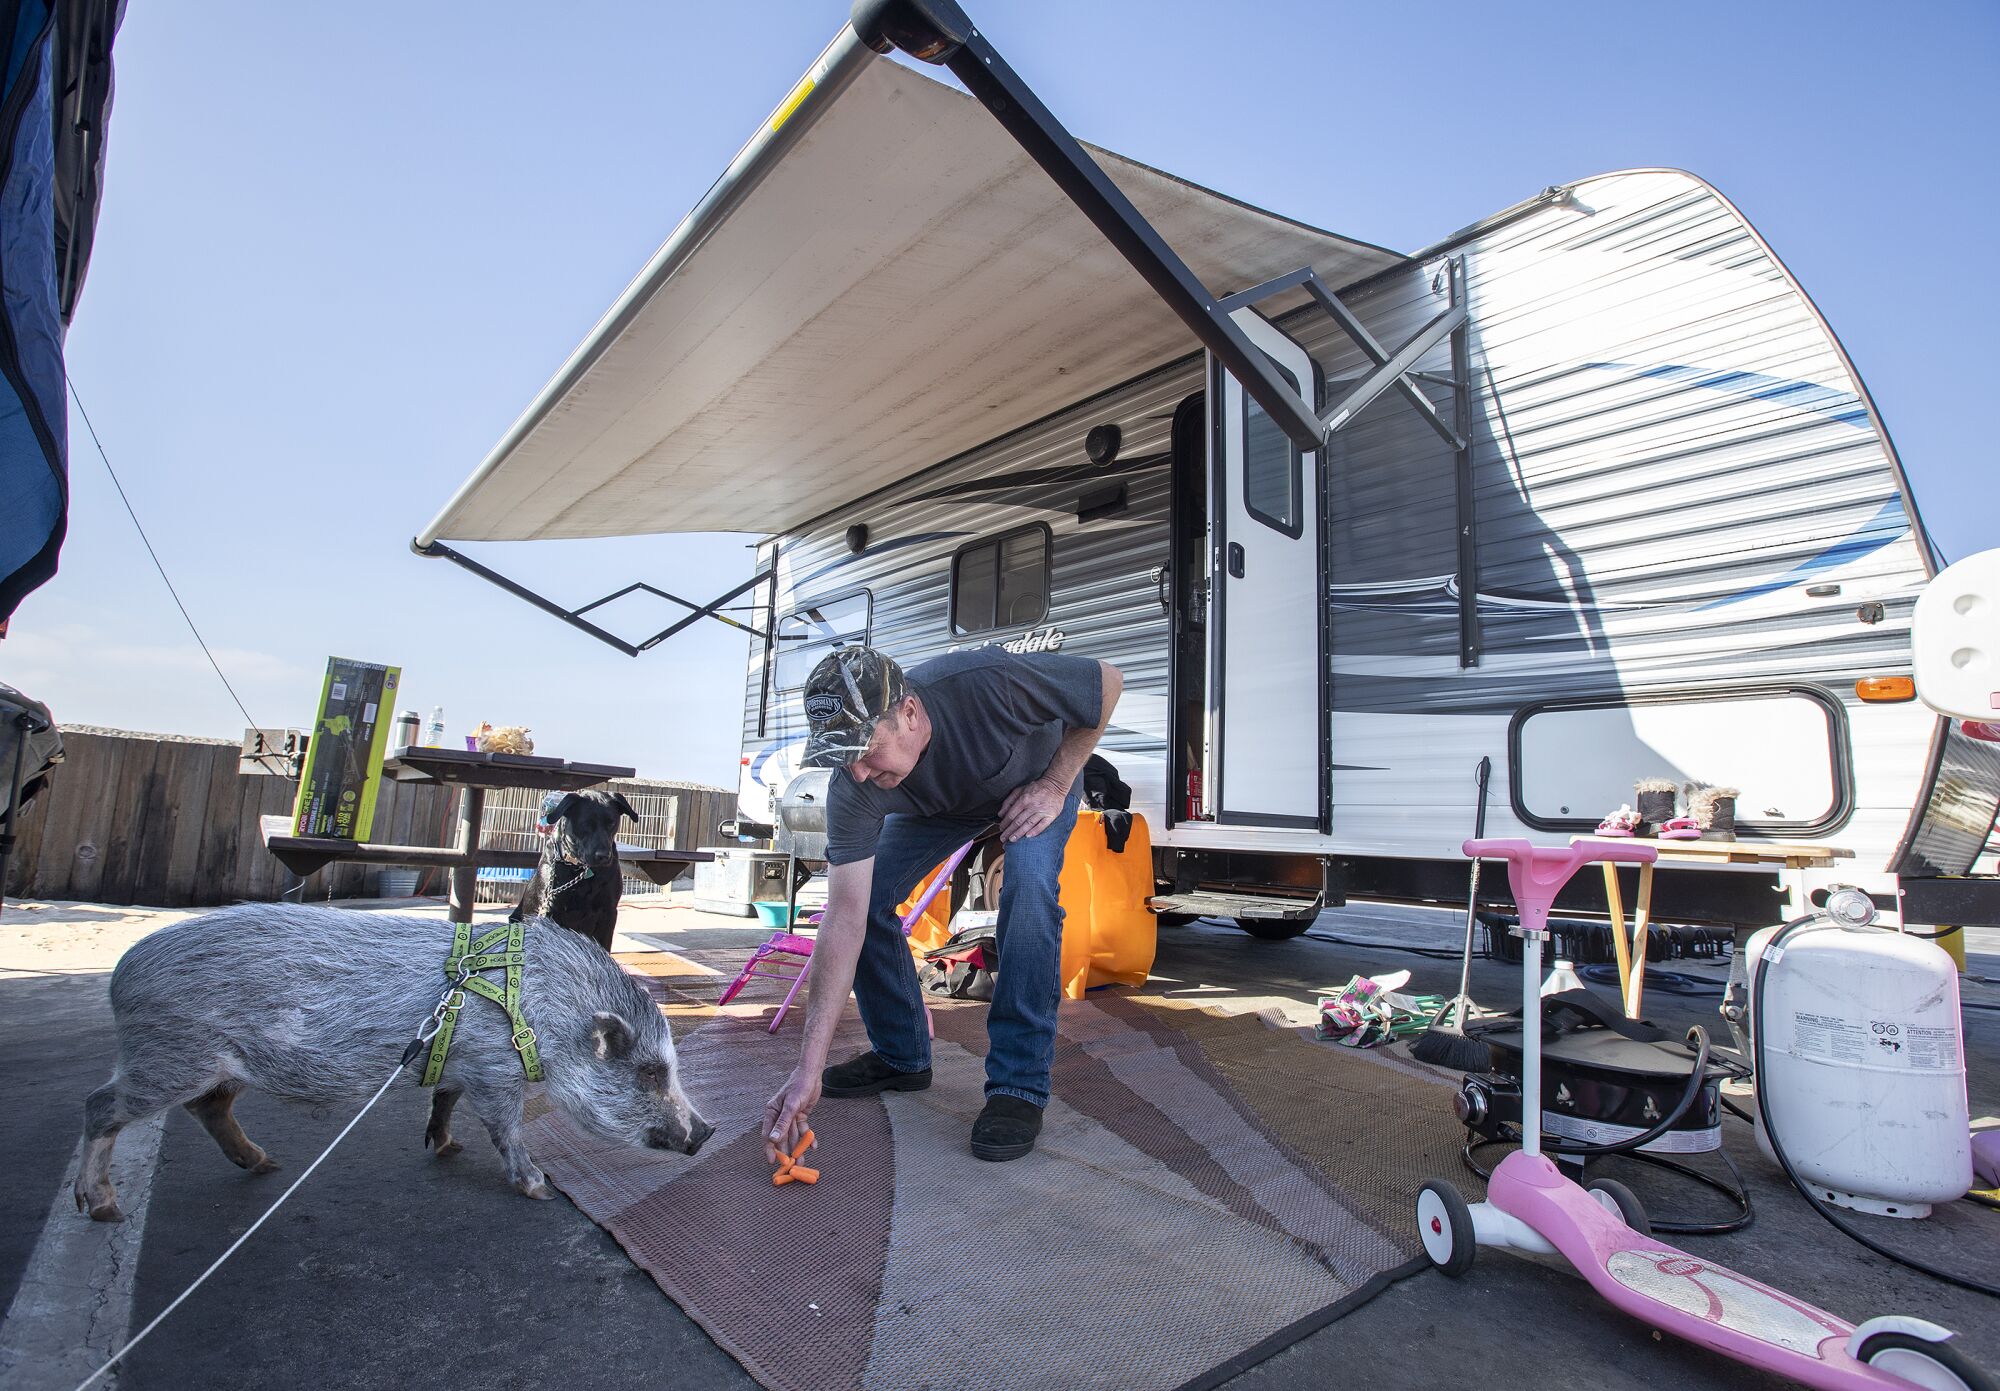 A man bends over to put carrots on the ground in front of his leashed pet pig outside his RV.